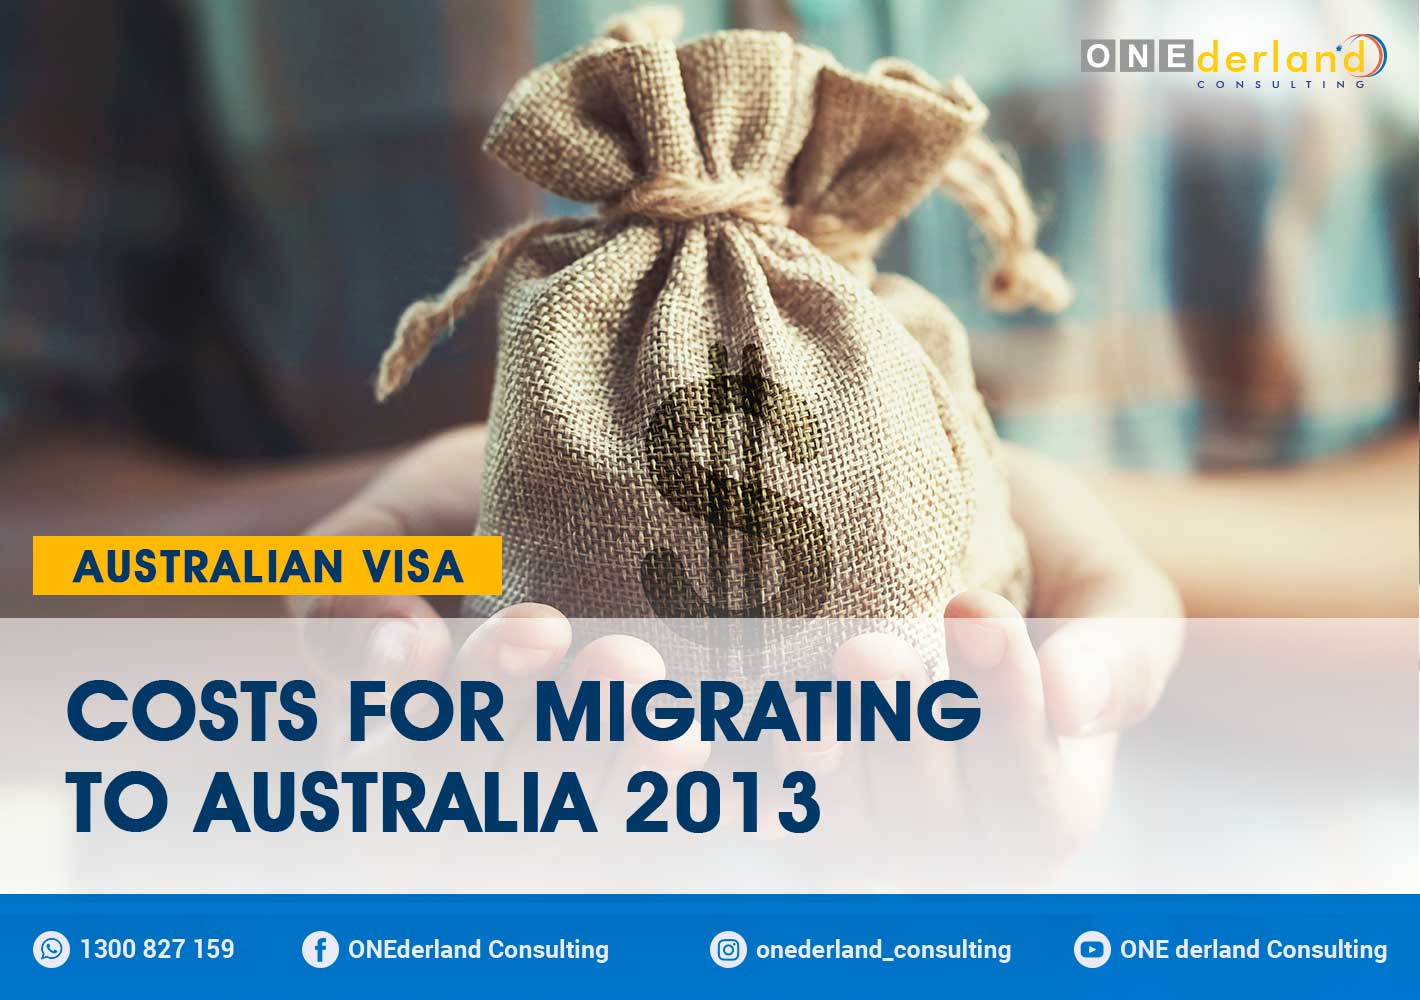 Costs for Migrating to Australia 2013